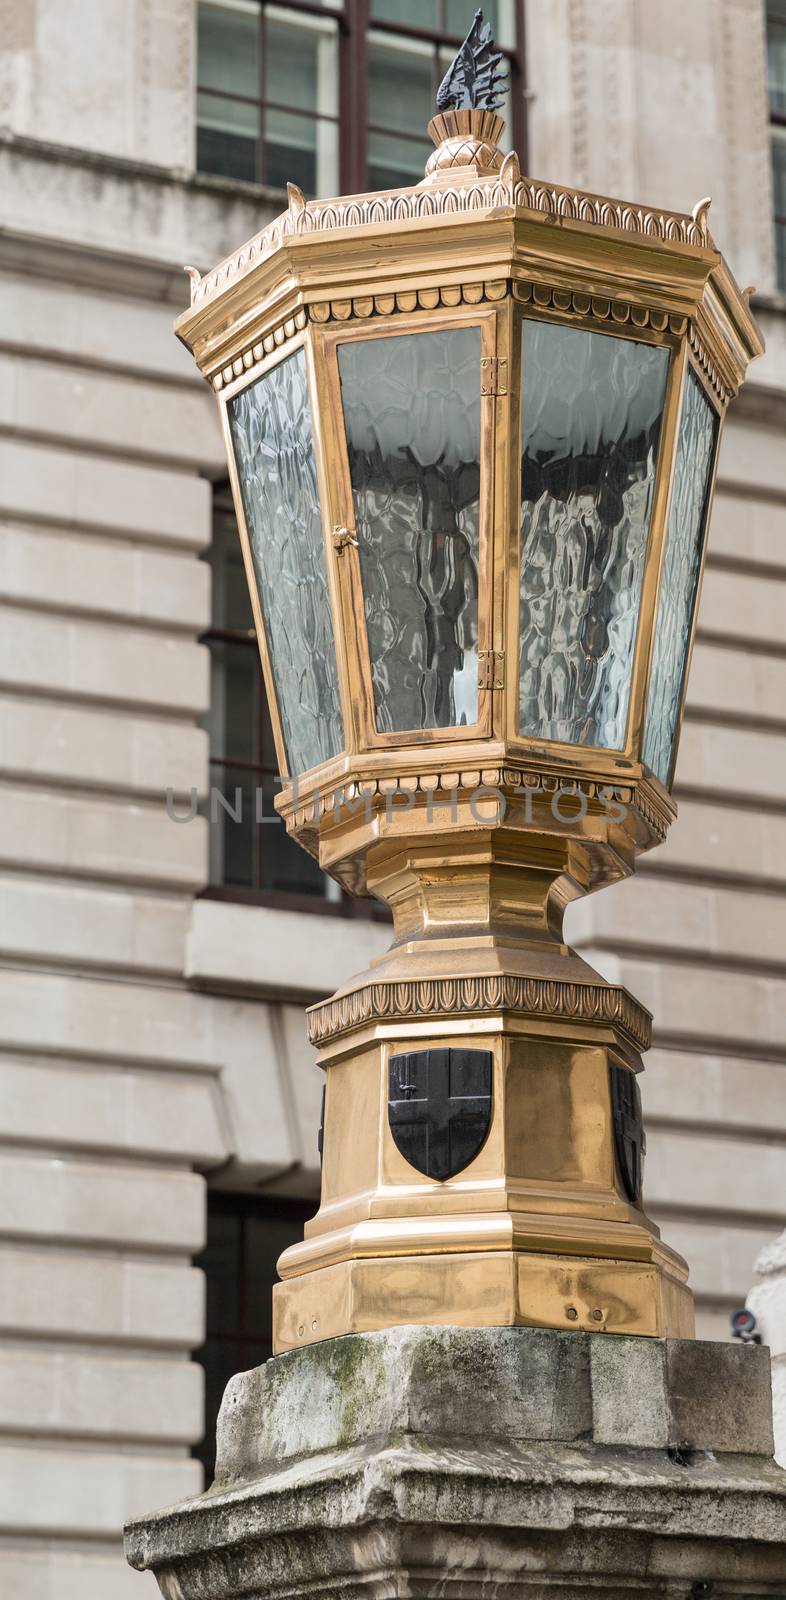 Old Lamp in the City of London by chrisukphoto